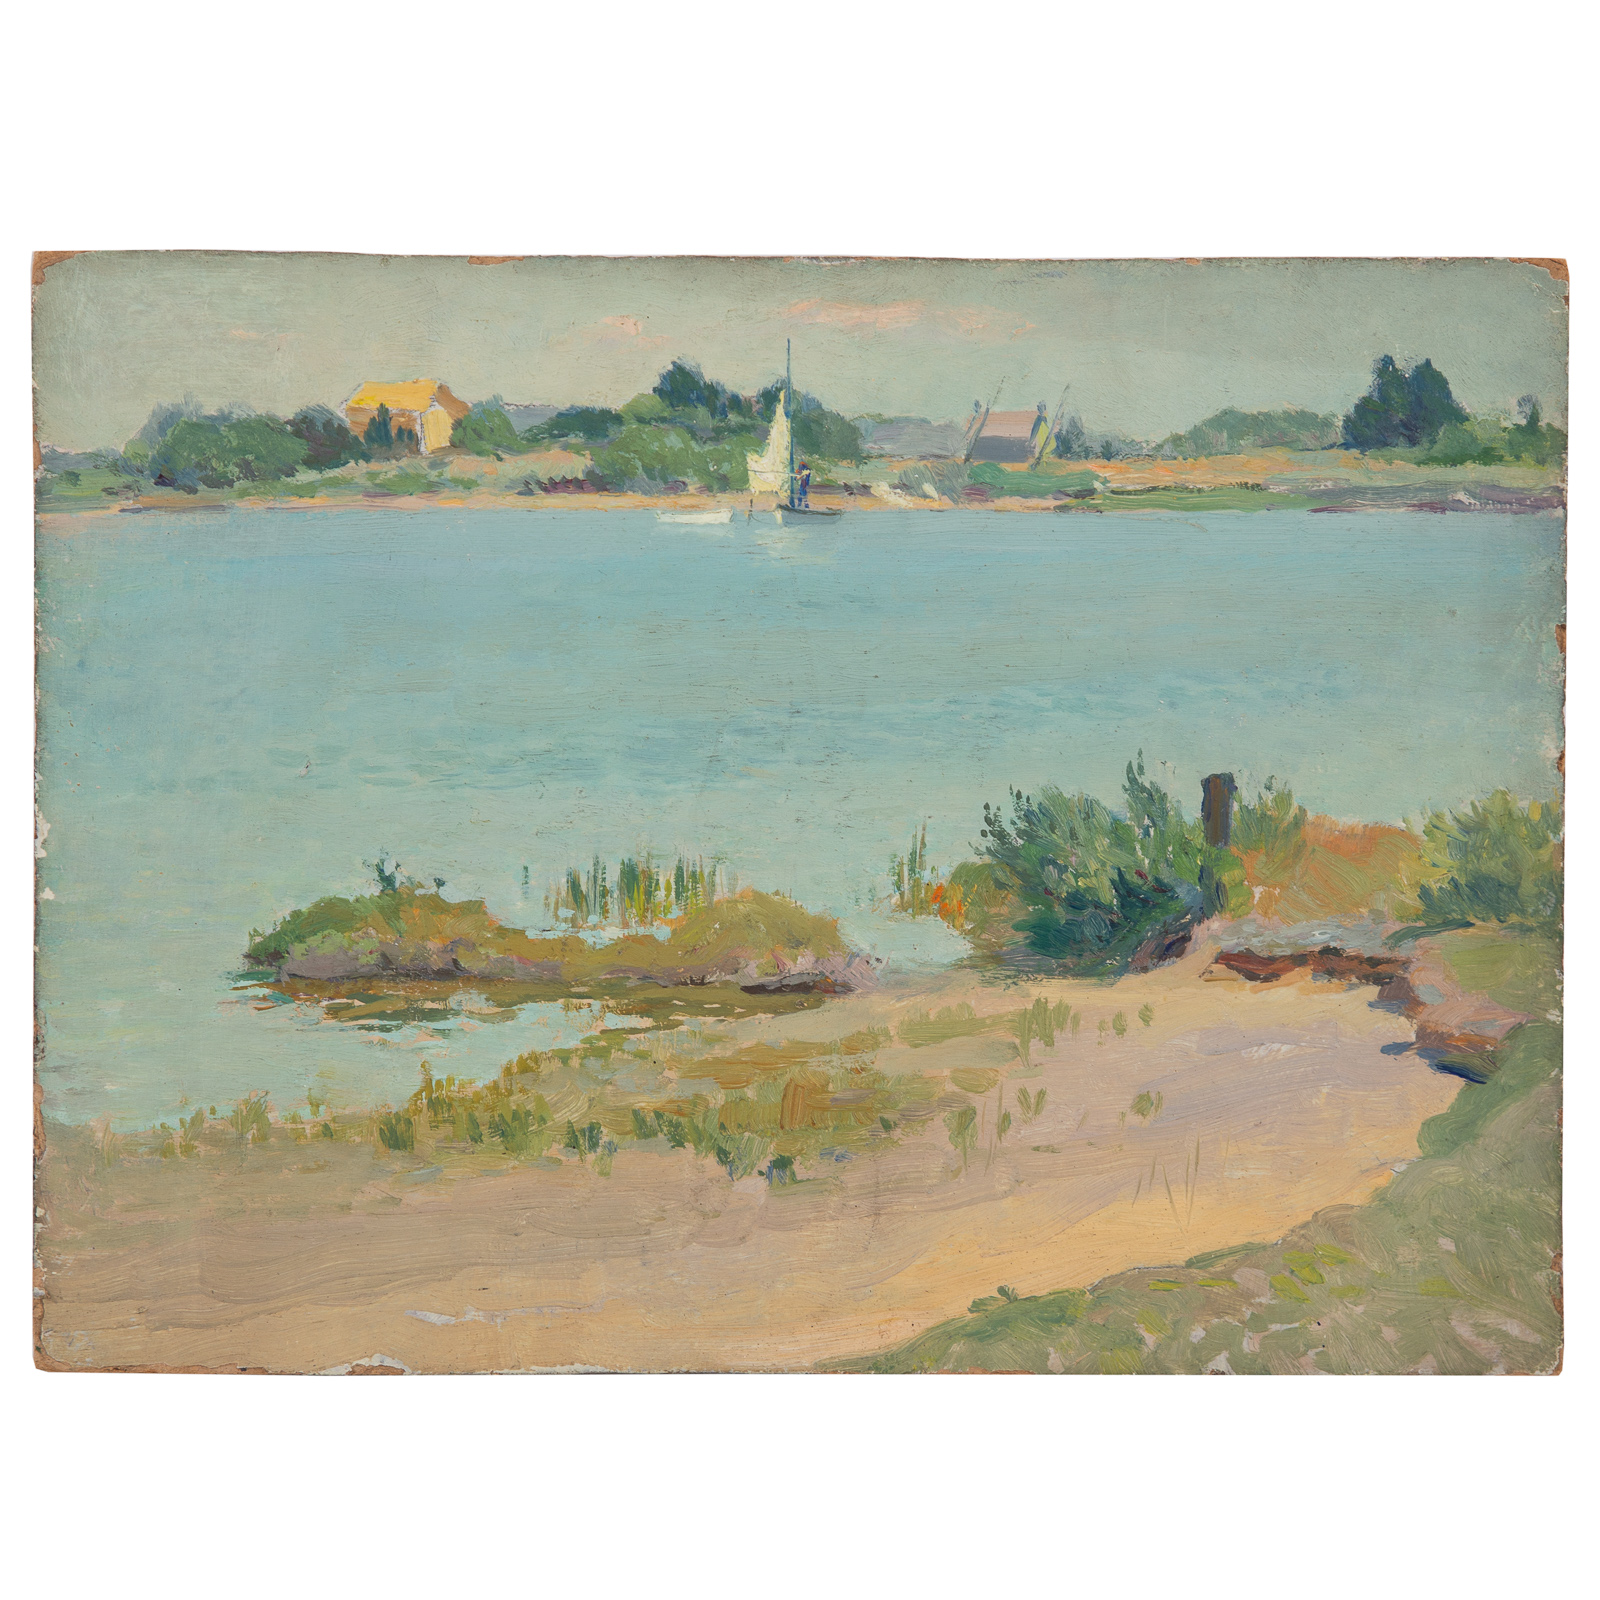 LOUIS J FEUCHTER BY THE LAKESIDE  338847